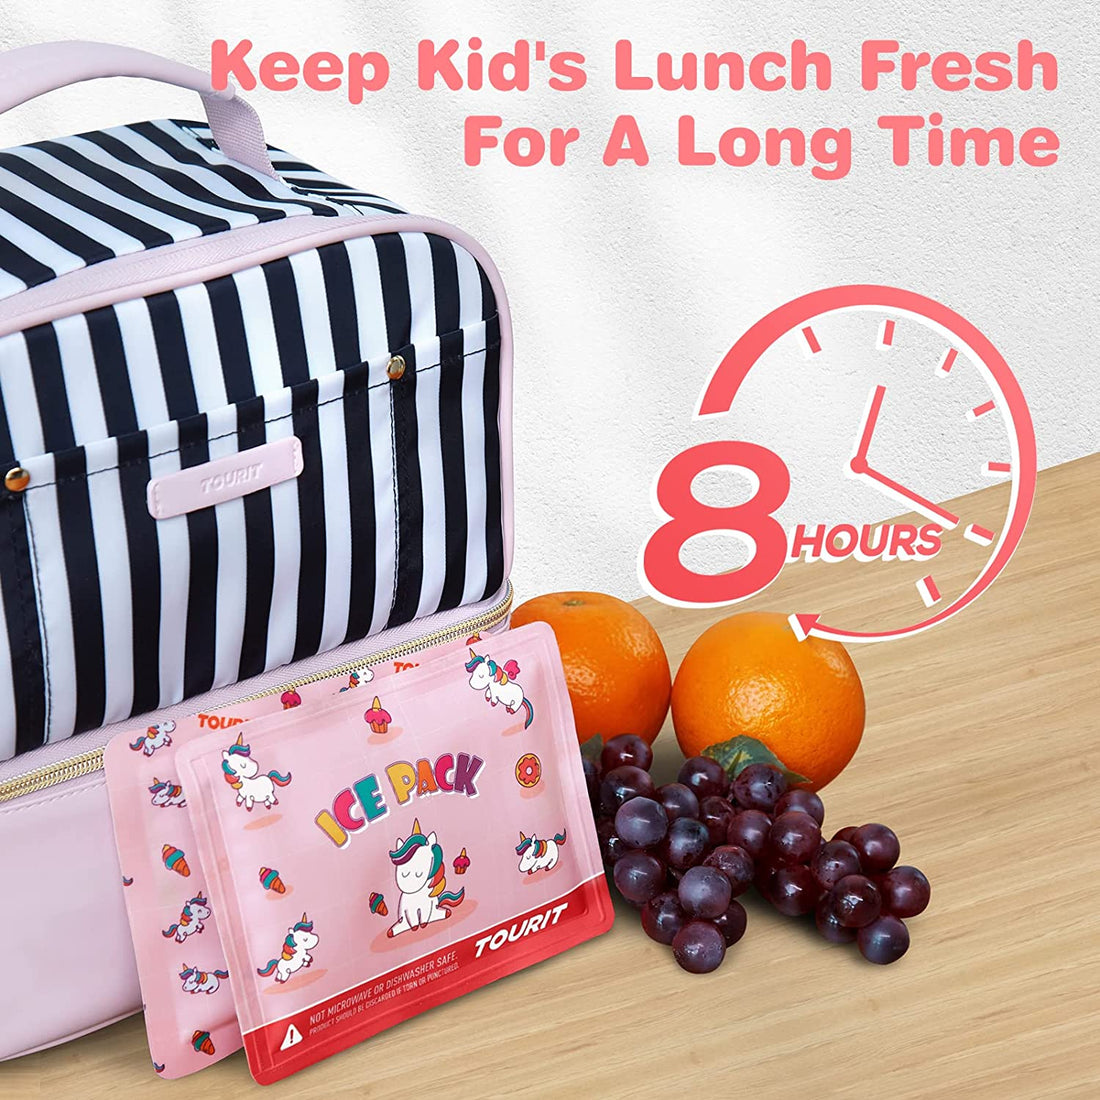 Monkey Business Kids Ice Packs for Lunch Box/Lunch Ice Packs Reusable/Slim  Ice Packs Perfect for Your Kid's Lunch Box/Fun Freezer Packs Your Kids Will